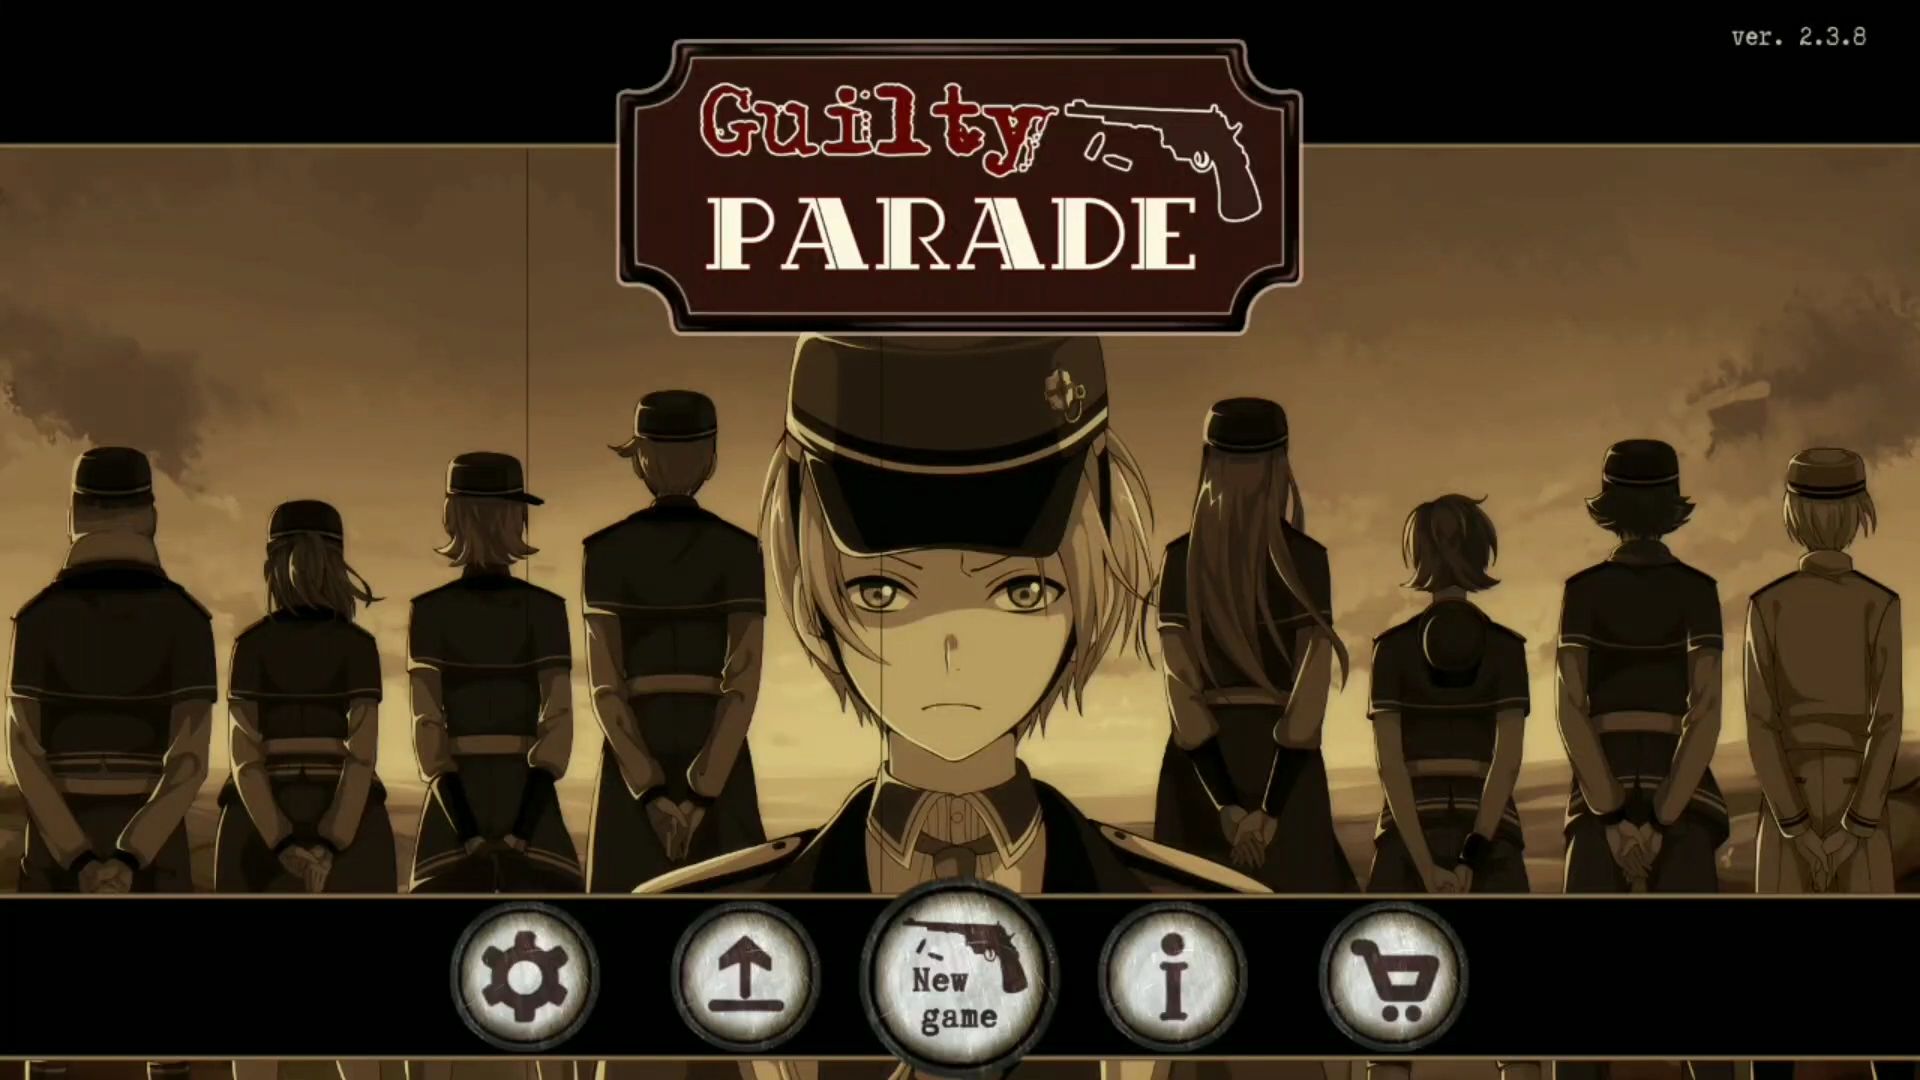 Full version of Android A.n.d.r.o.i.d. .5...0. .a.n.d. .m.o.r.e apk Guilty Parade for tablet and phone.